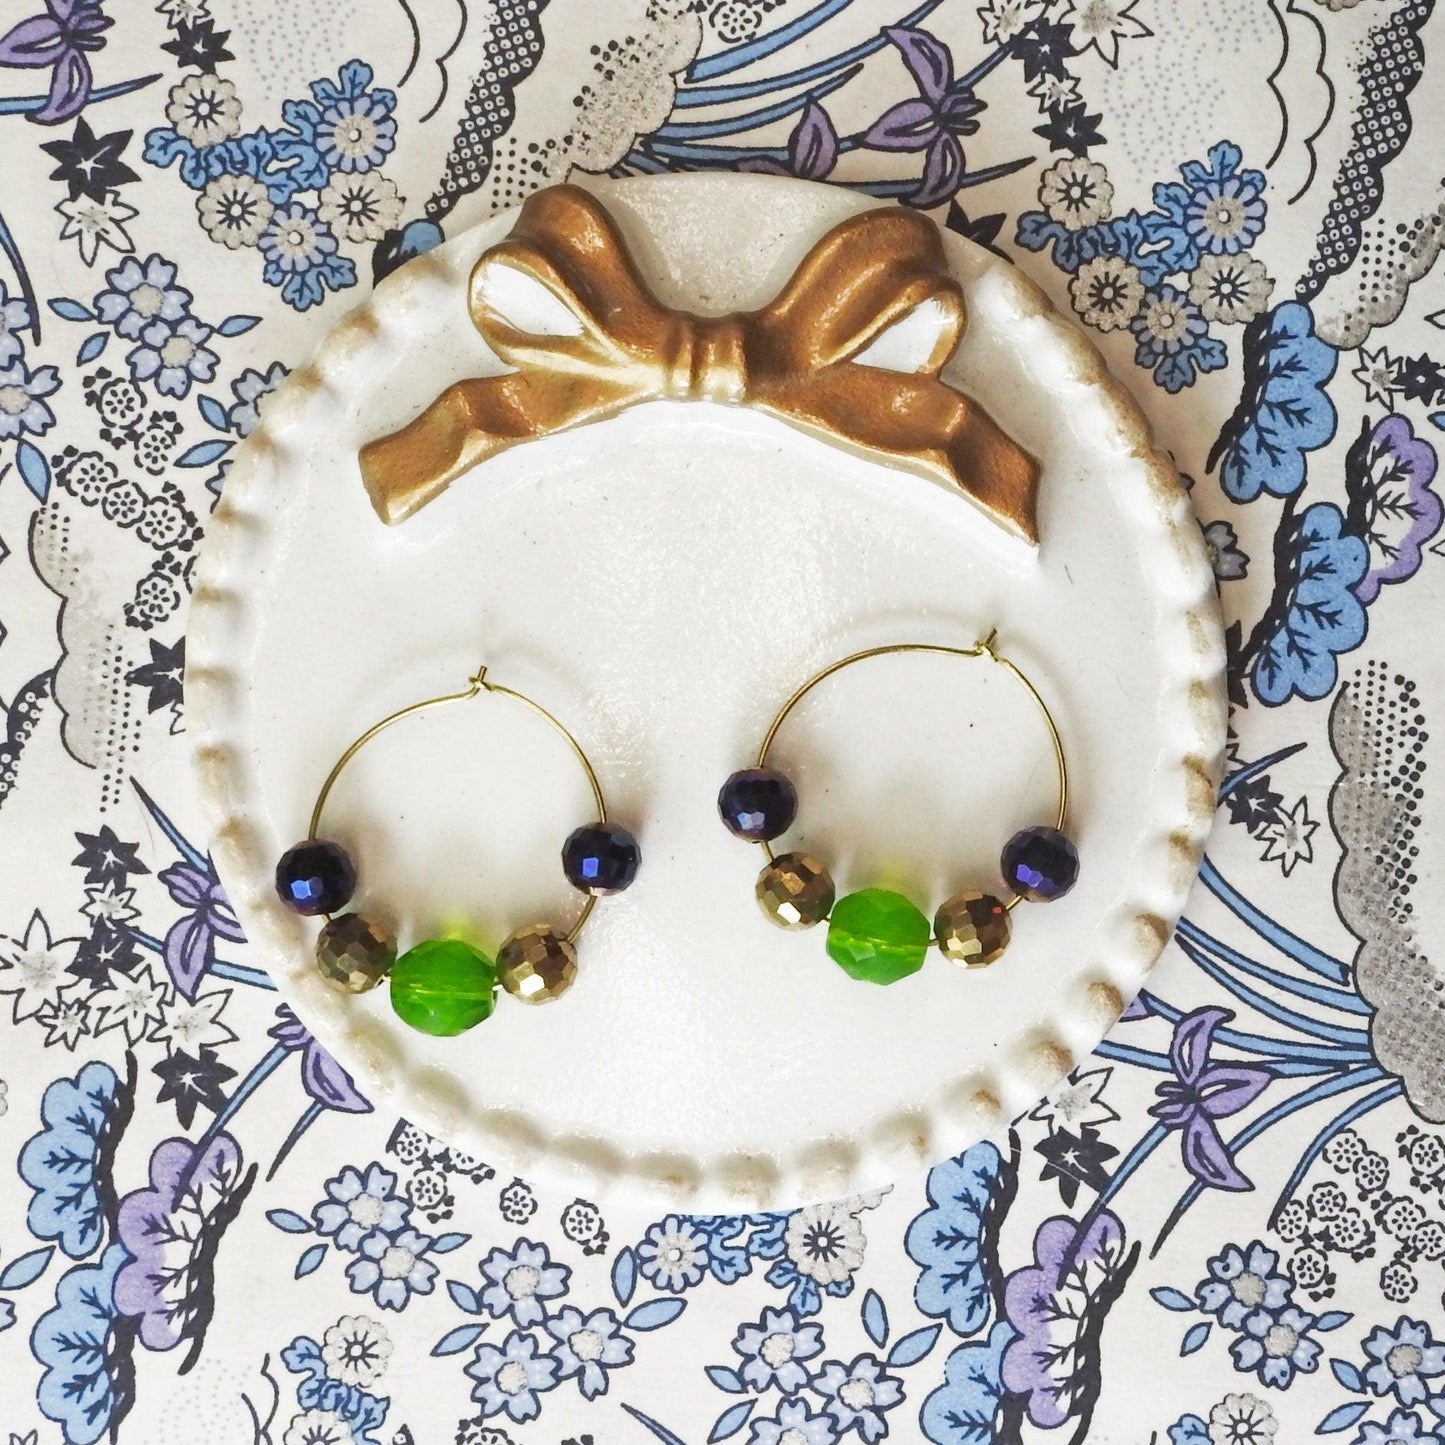 Cute colorful beaded hoop earrings, purple, green, and gold, with colored faceted beads. Pretty circle dangle earrings, handmade, 30 mm.